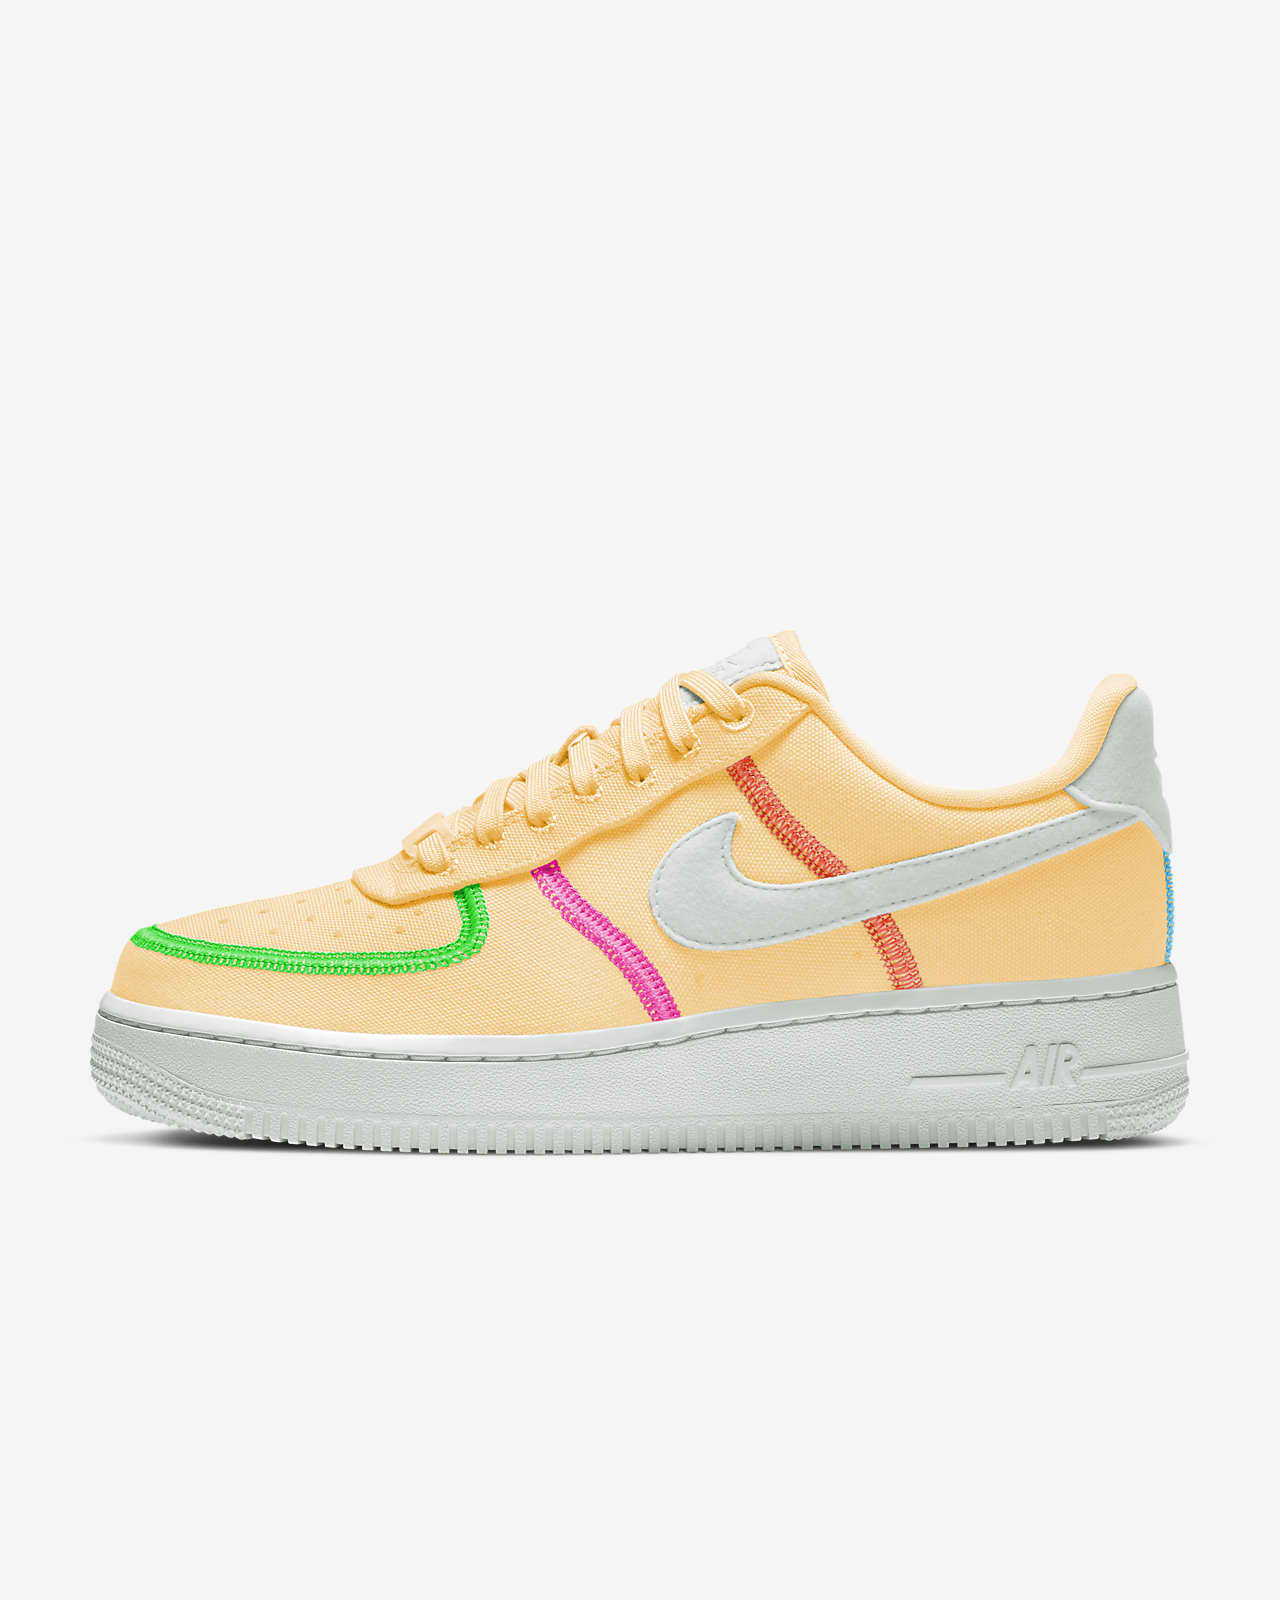 nike chaussures air force 1 femme